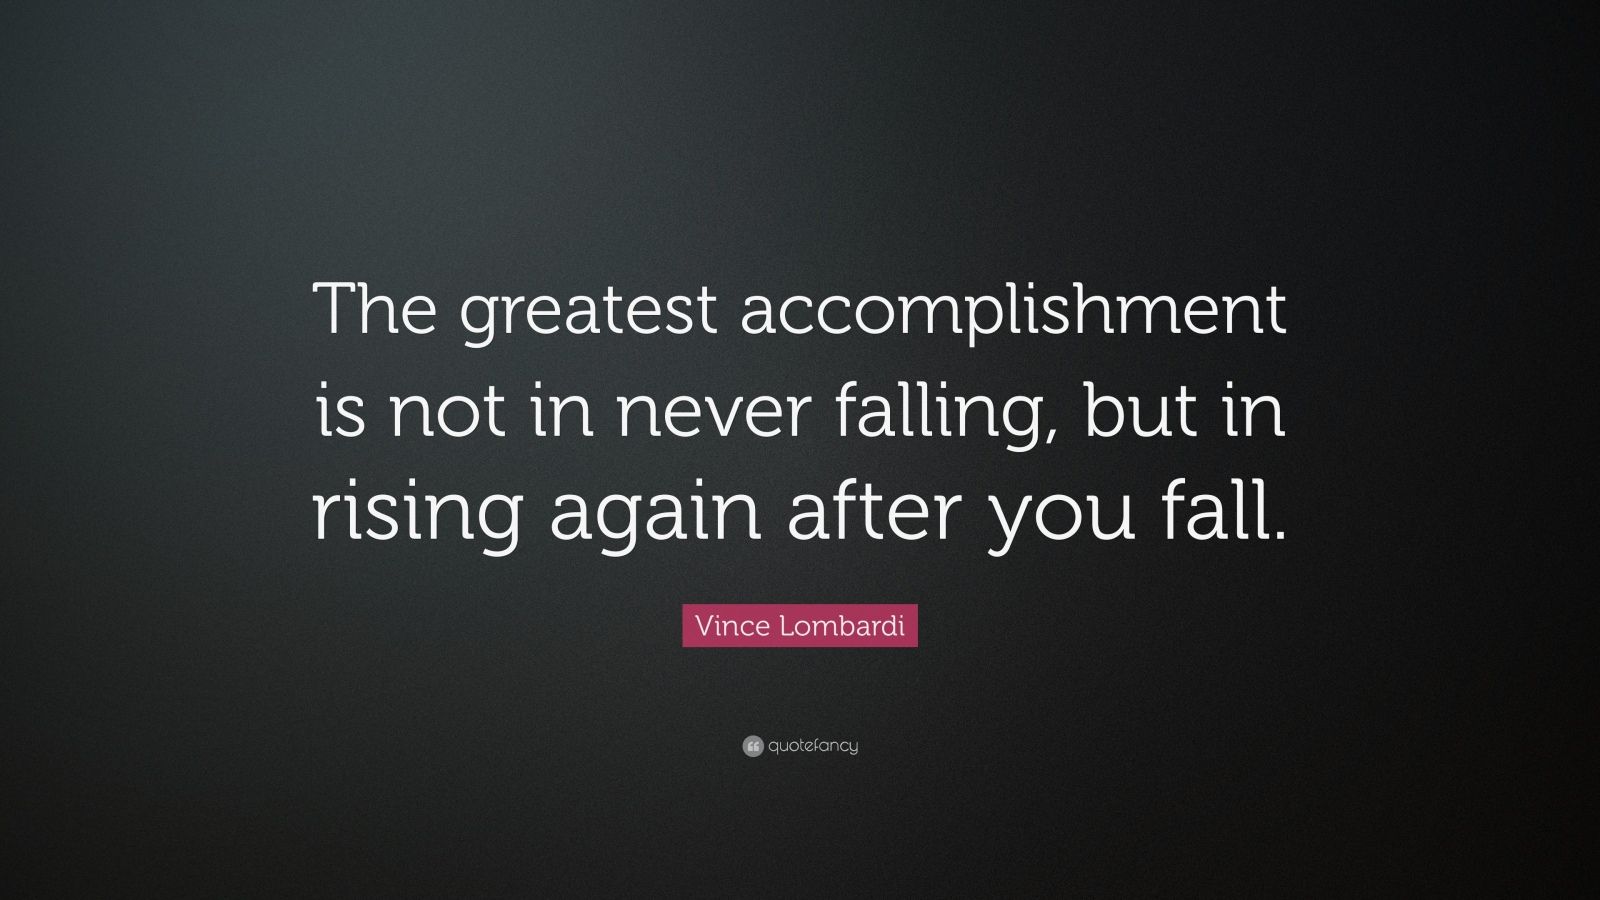 ... is not in never falling, but in rising again after you fall